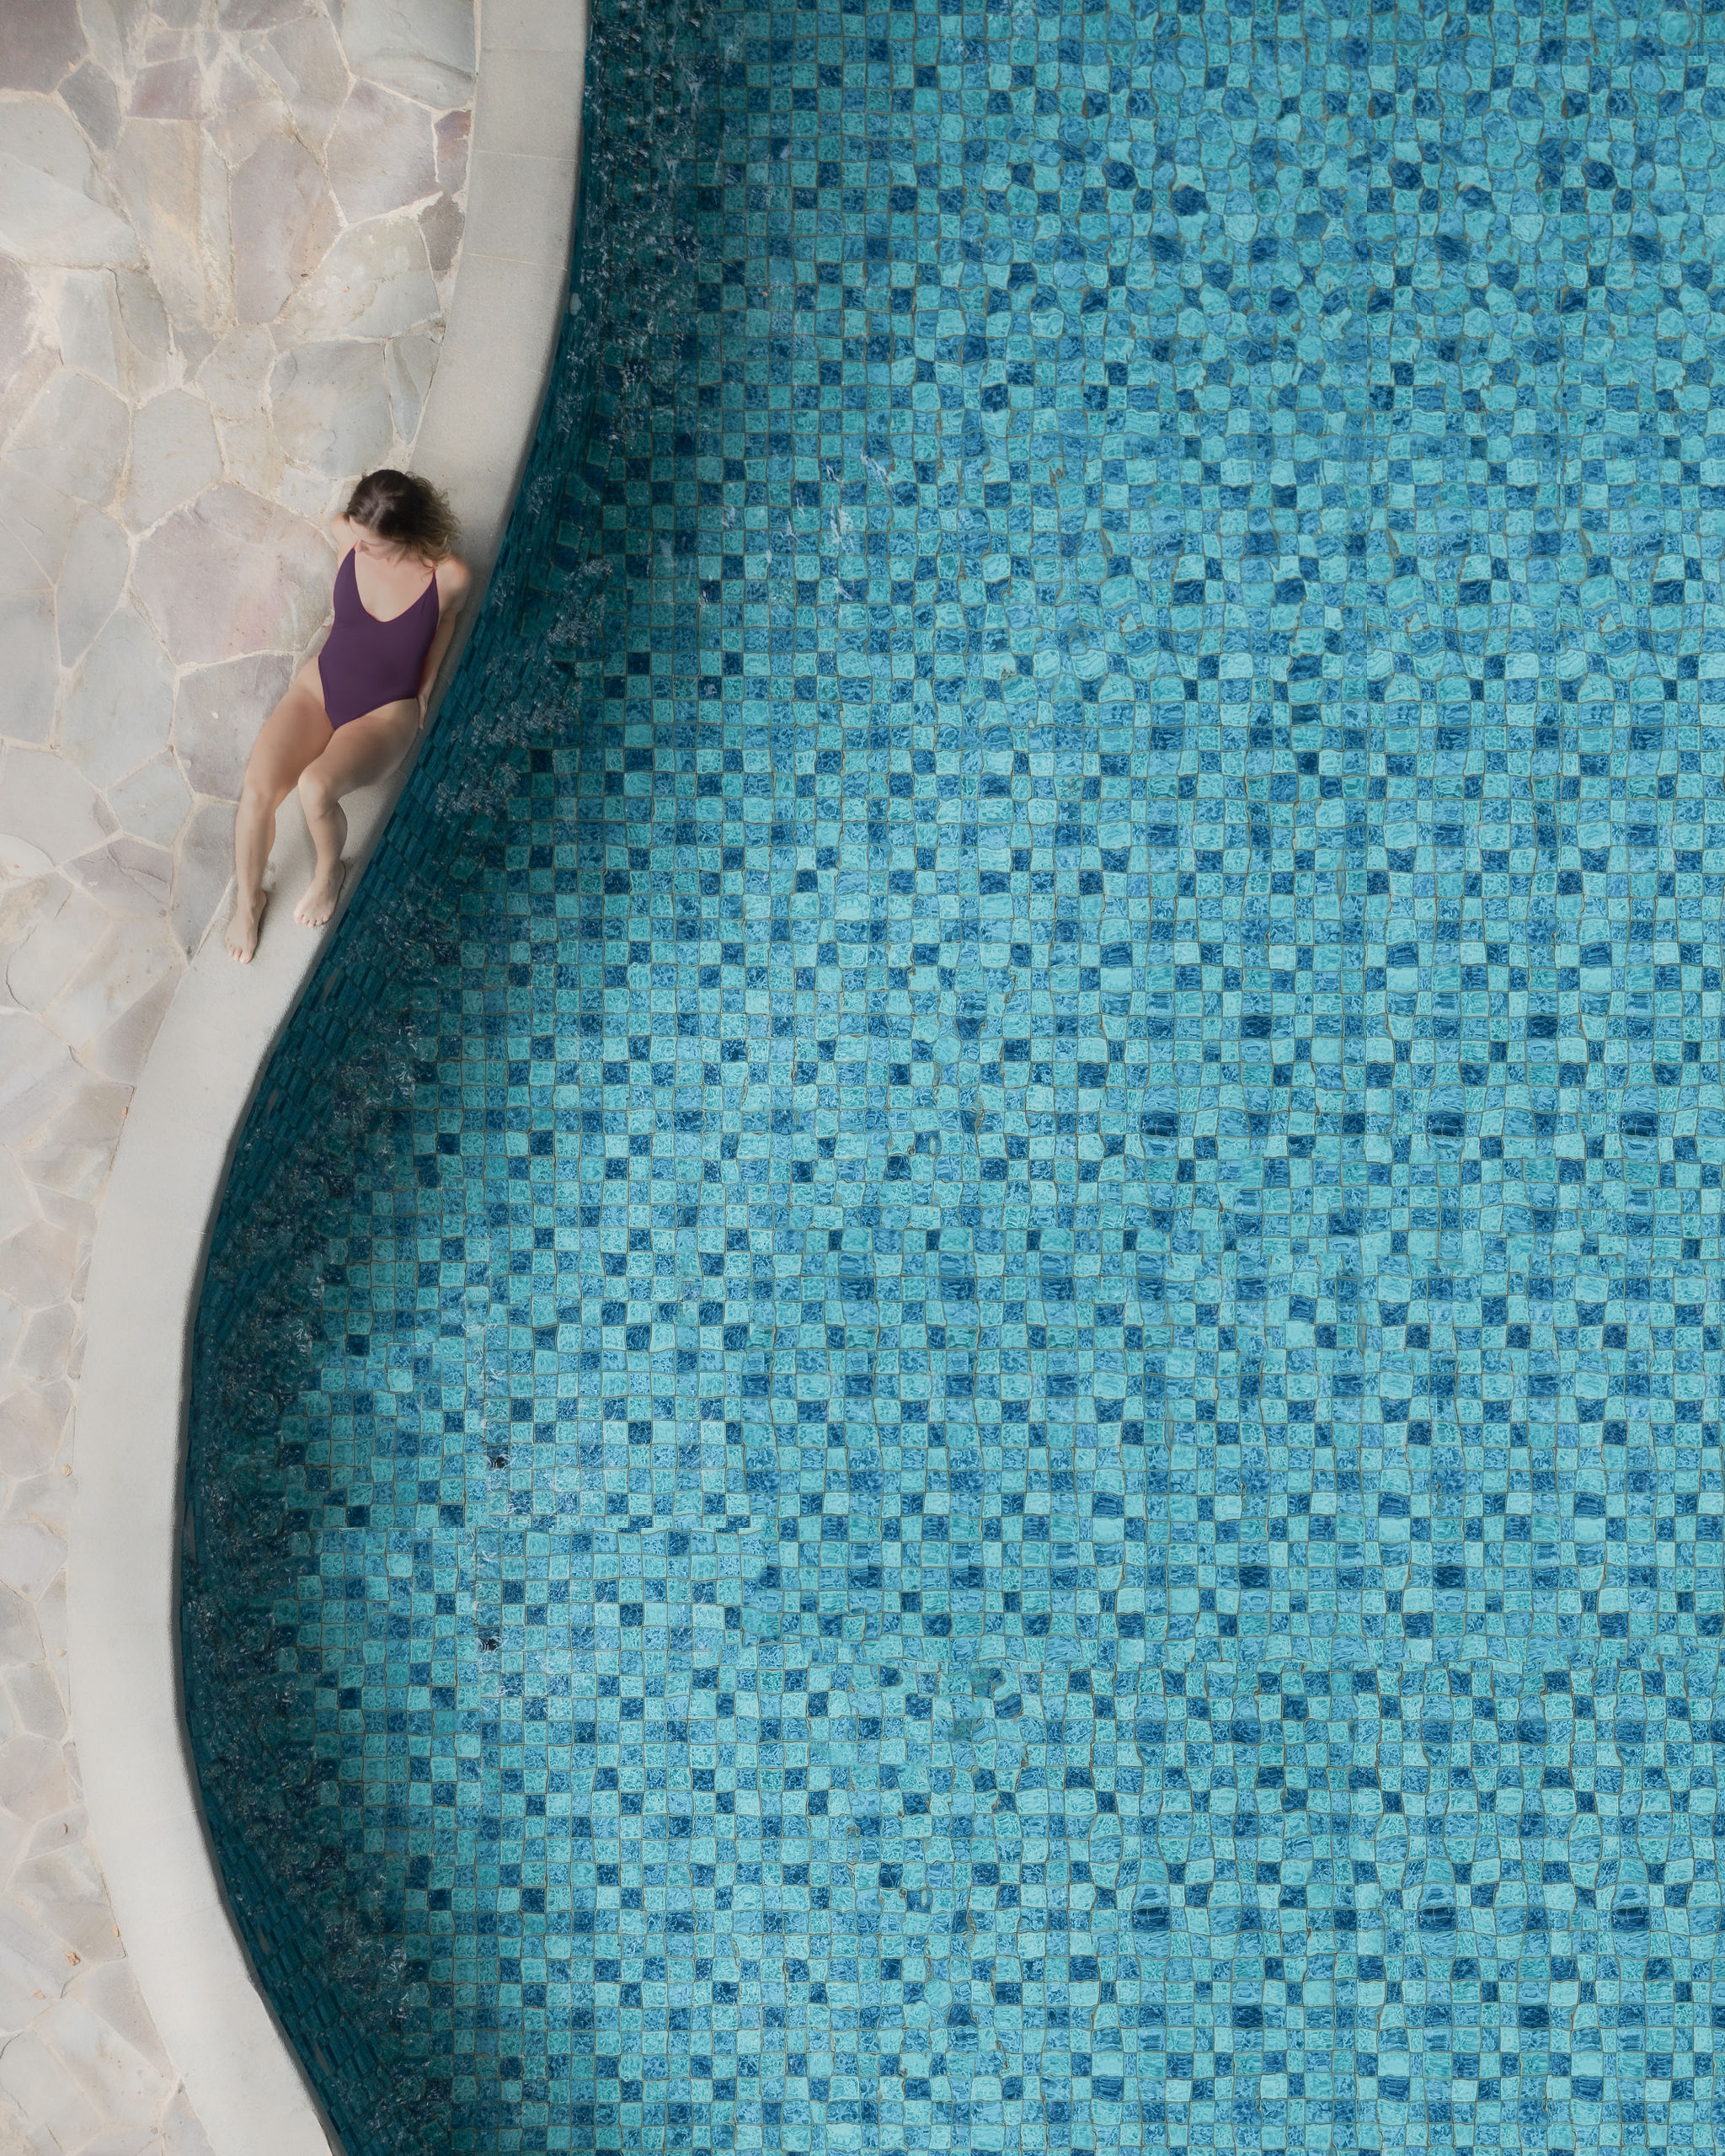 Brad Walls recently released a new series of photos – an ode to the beauty found in the shapes, colors, and textures of swimming pools.